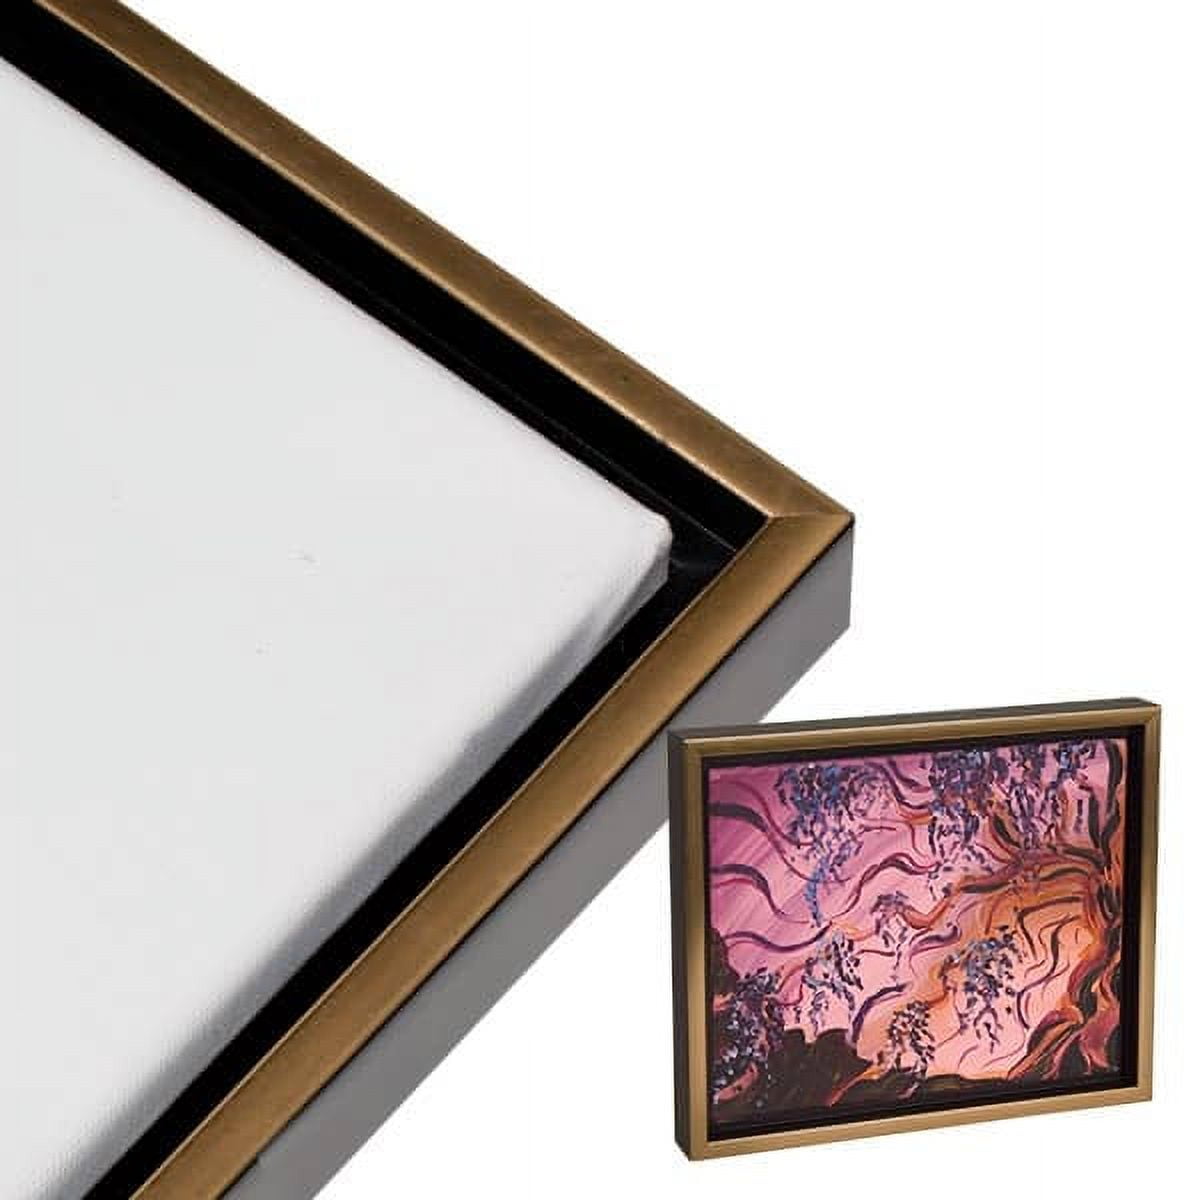 Illusions Floater Frame for 3/4 Canvas 16x20 - Gold/Black - 6 Pack